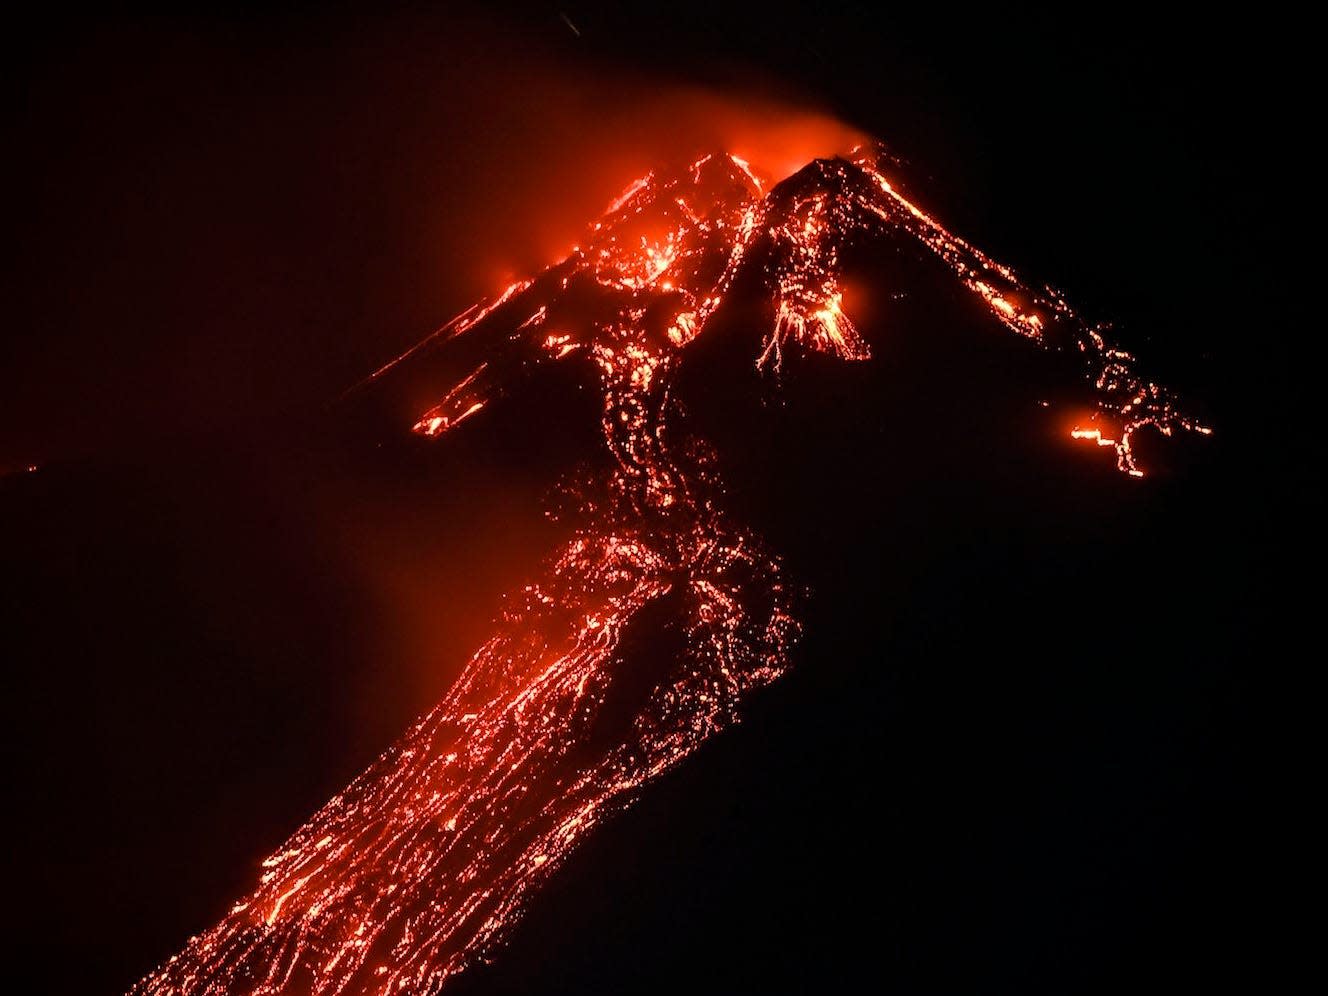 Incredible photos show the dramatic eruption of Mount Etna, the most active volcano in Europe